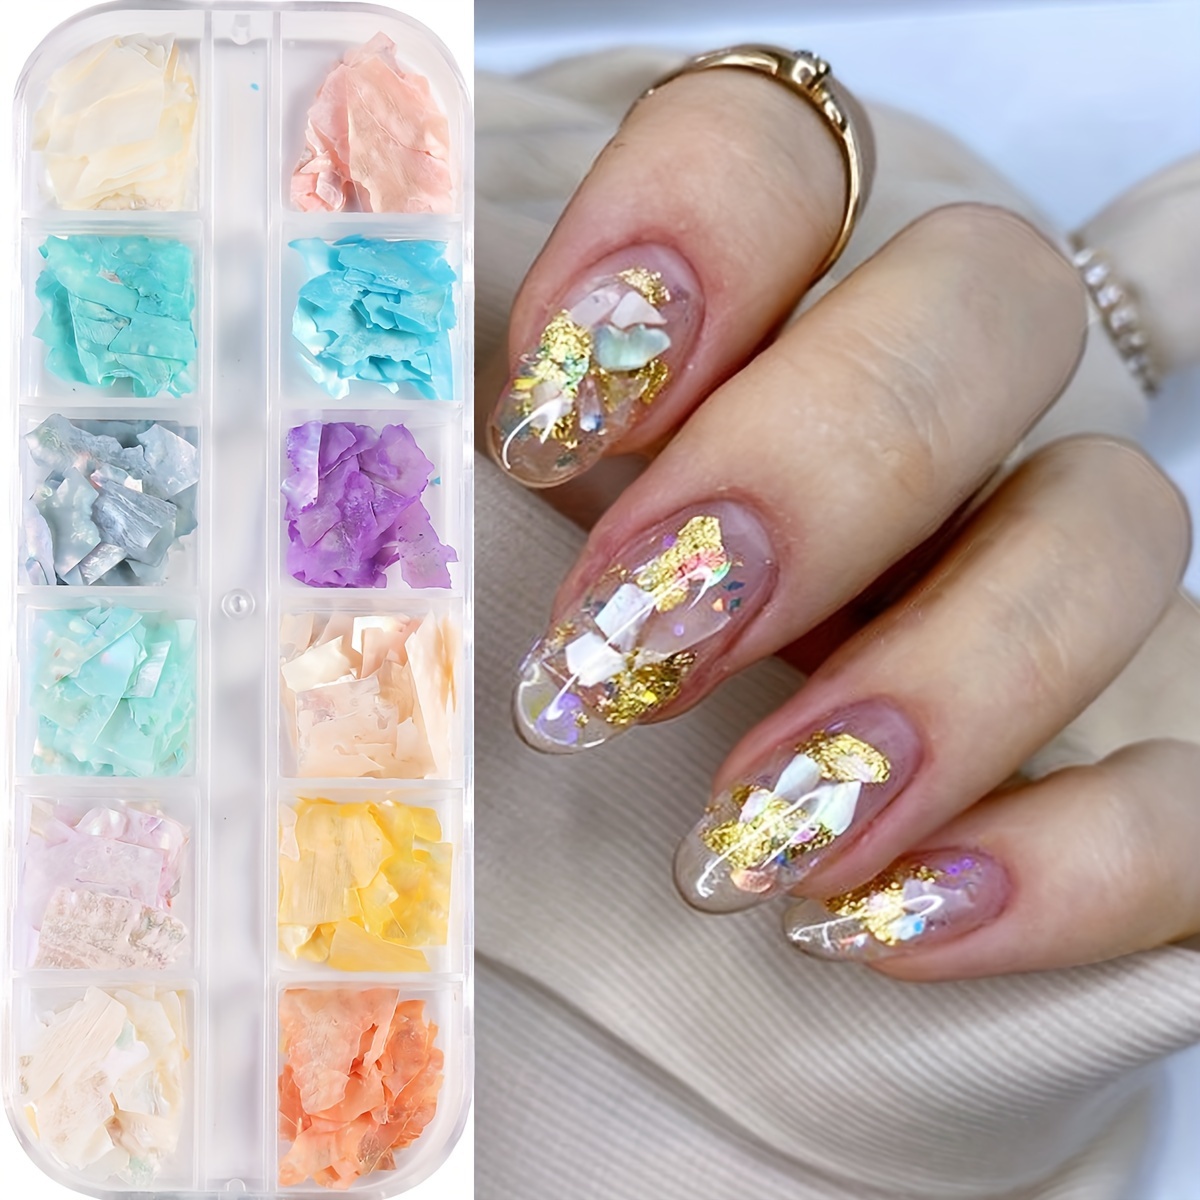 

12-grid Iridescent Abalone Shell Nail Art Decorations - Y2k Aesthetic, Mixed Colors, Shiny Seashell Sequins For Hands & Feet Care Seashell Nail Charms